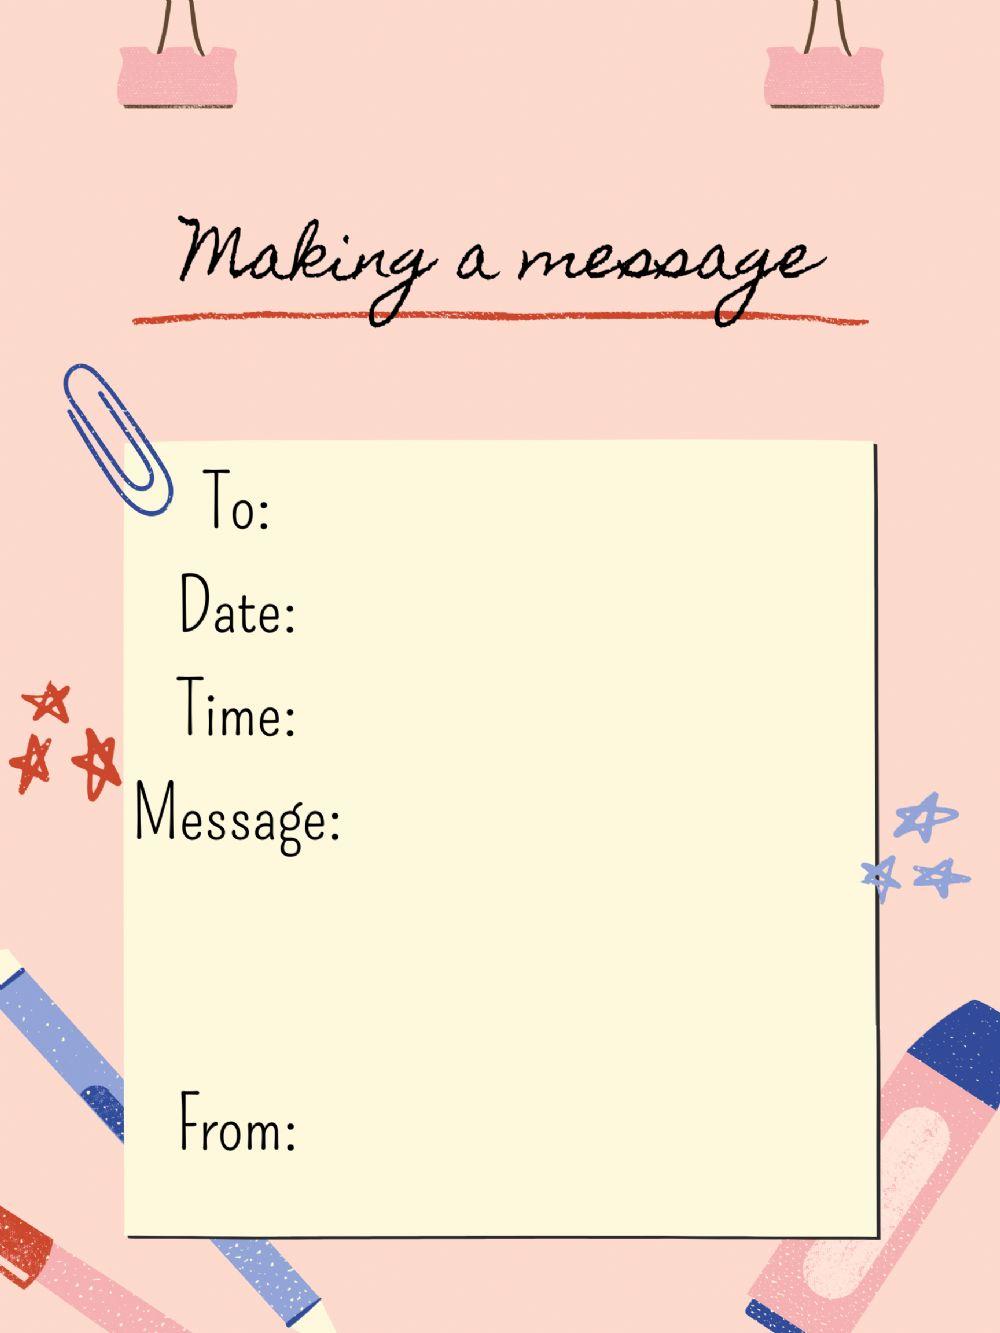 Making a message